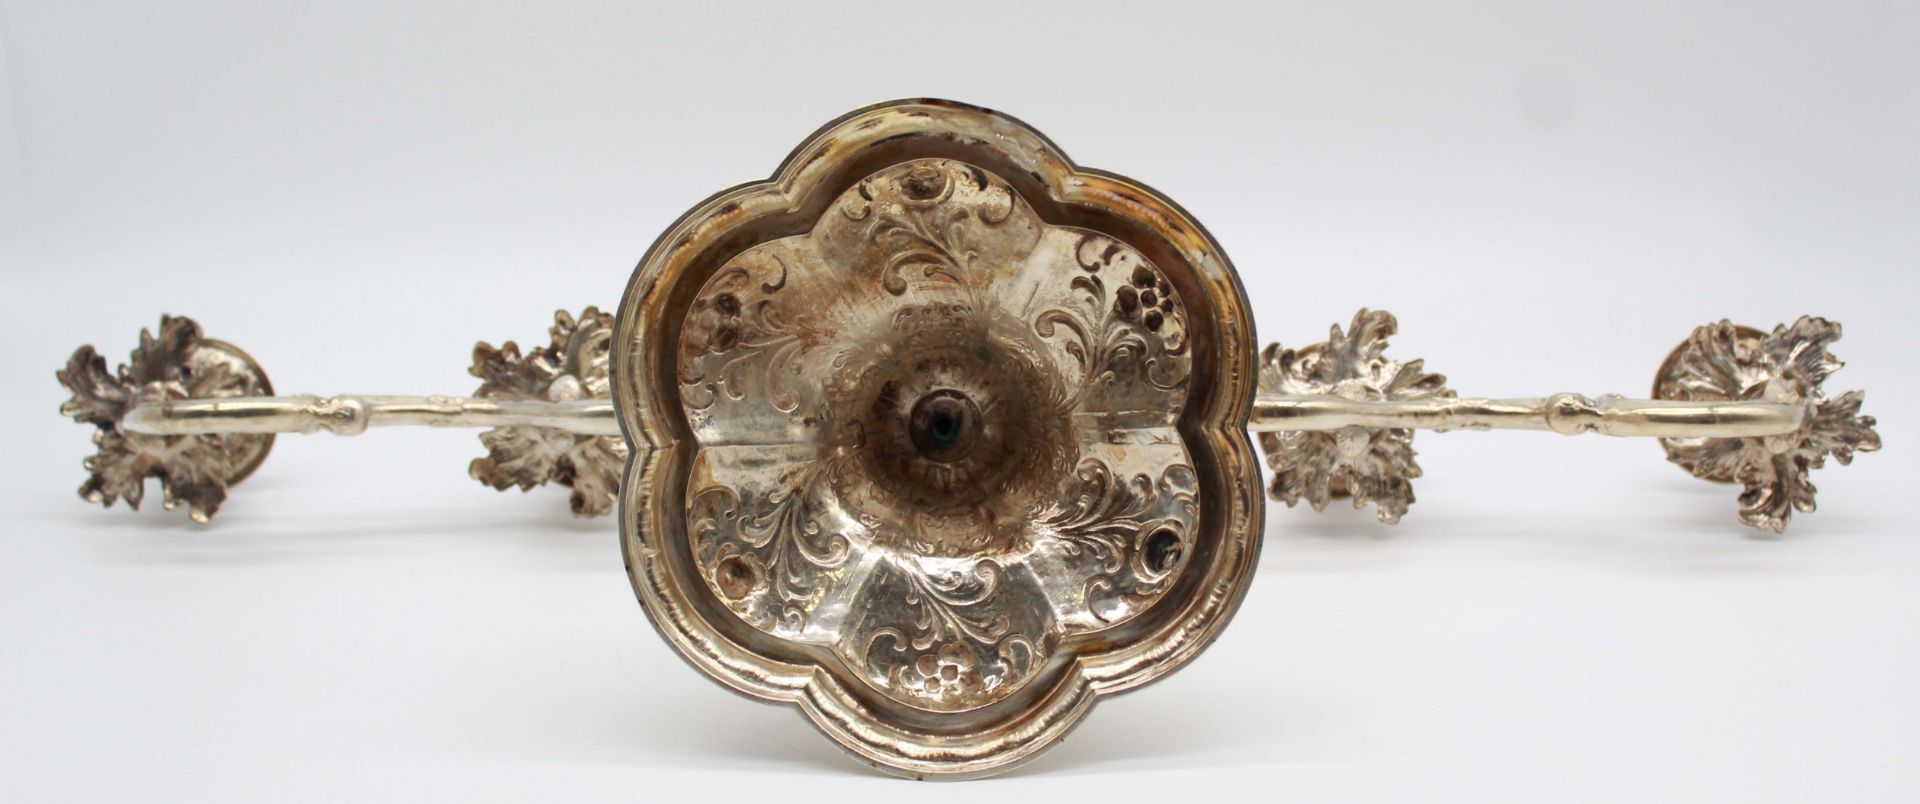 Candlestick, silver 800. 5 flames. Hallmarks. - Image 12 of 15